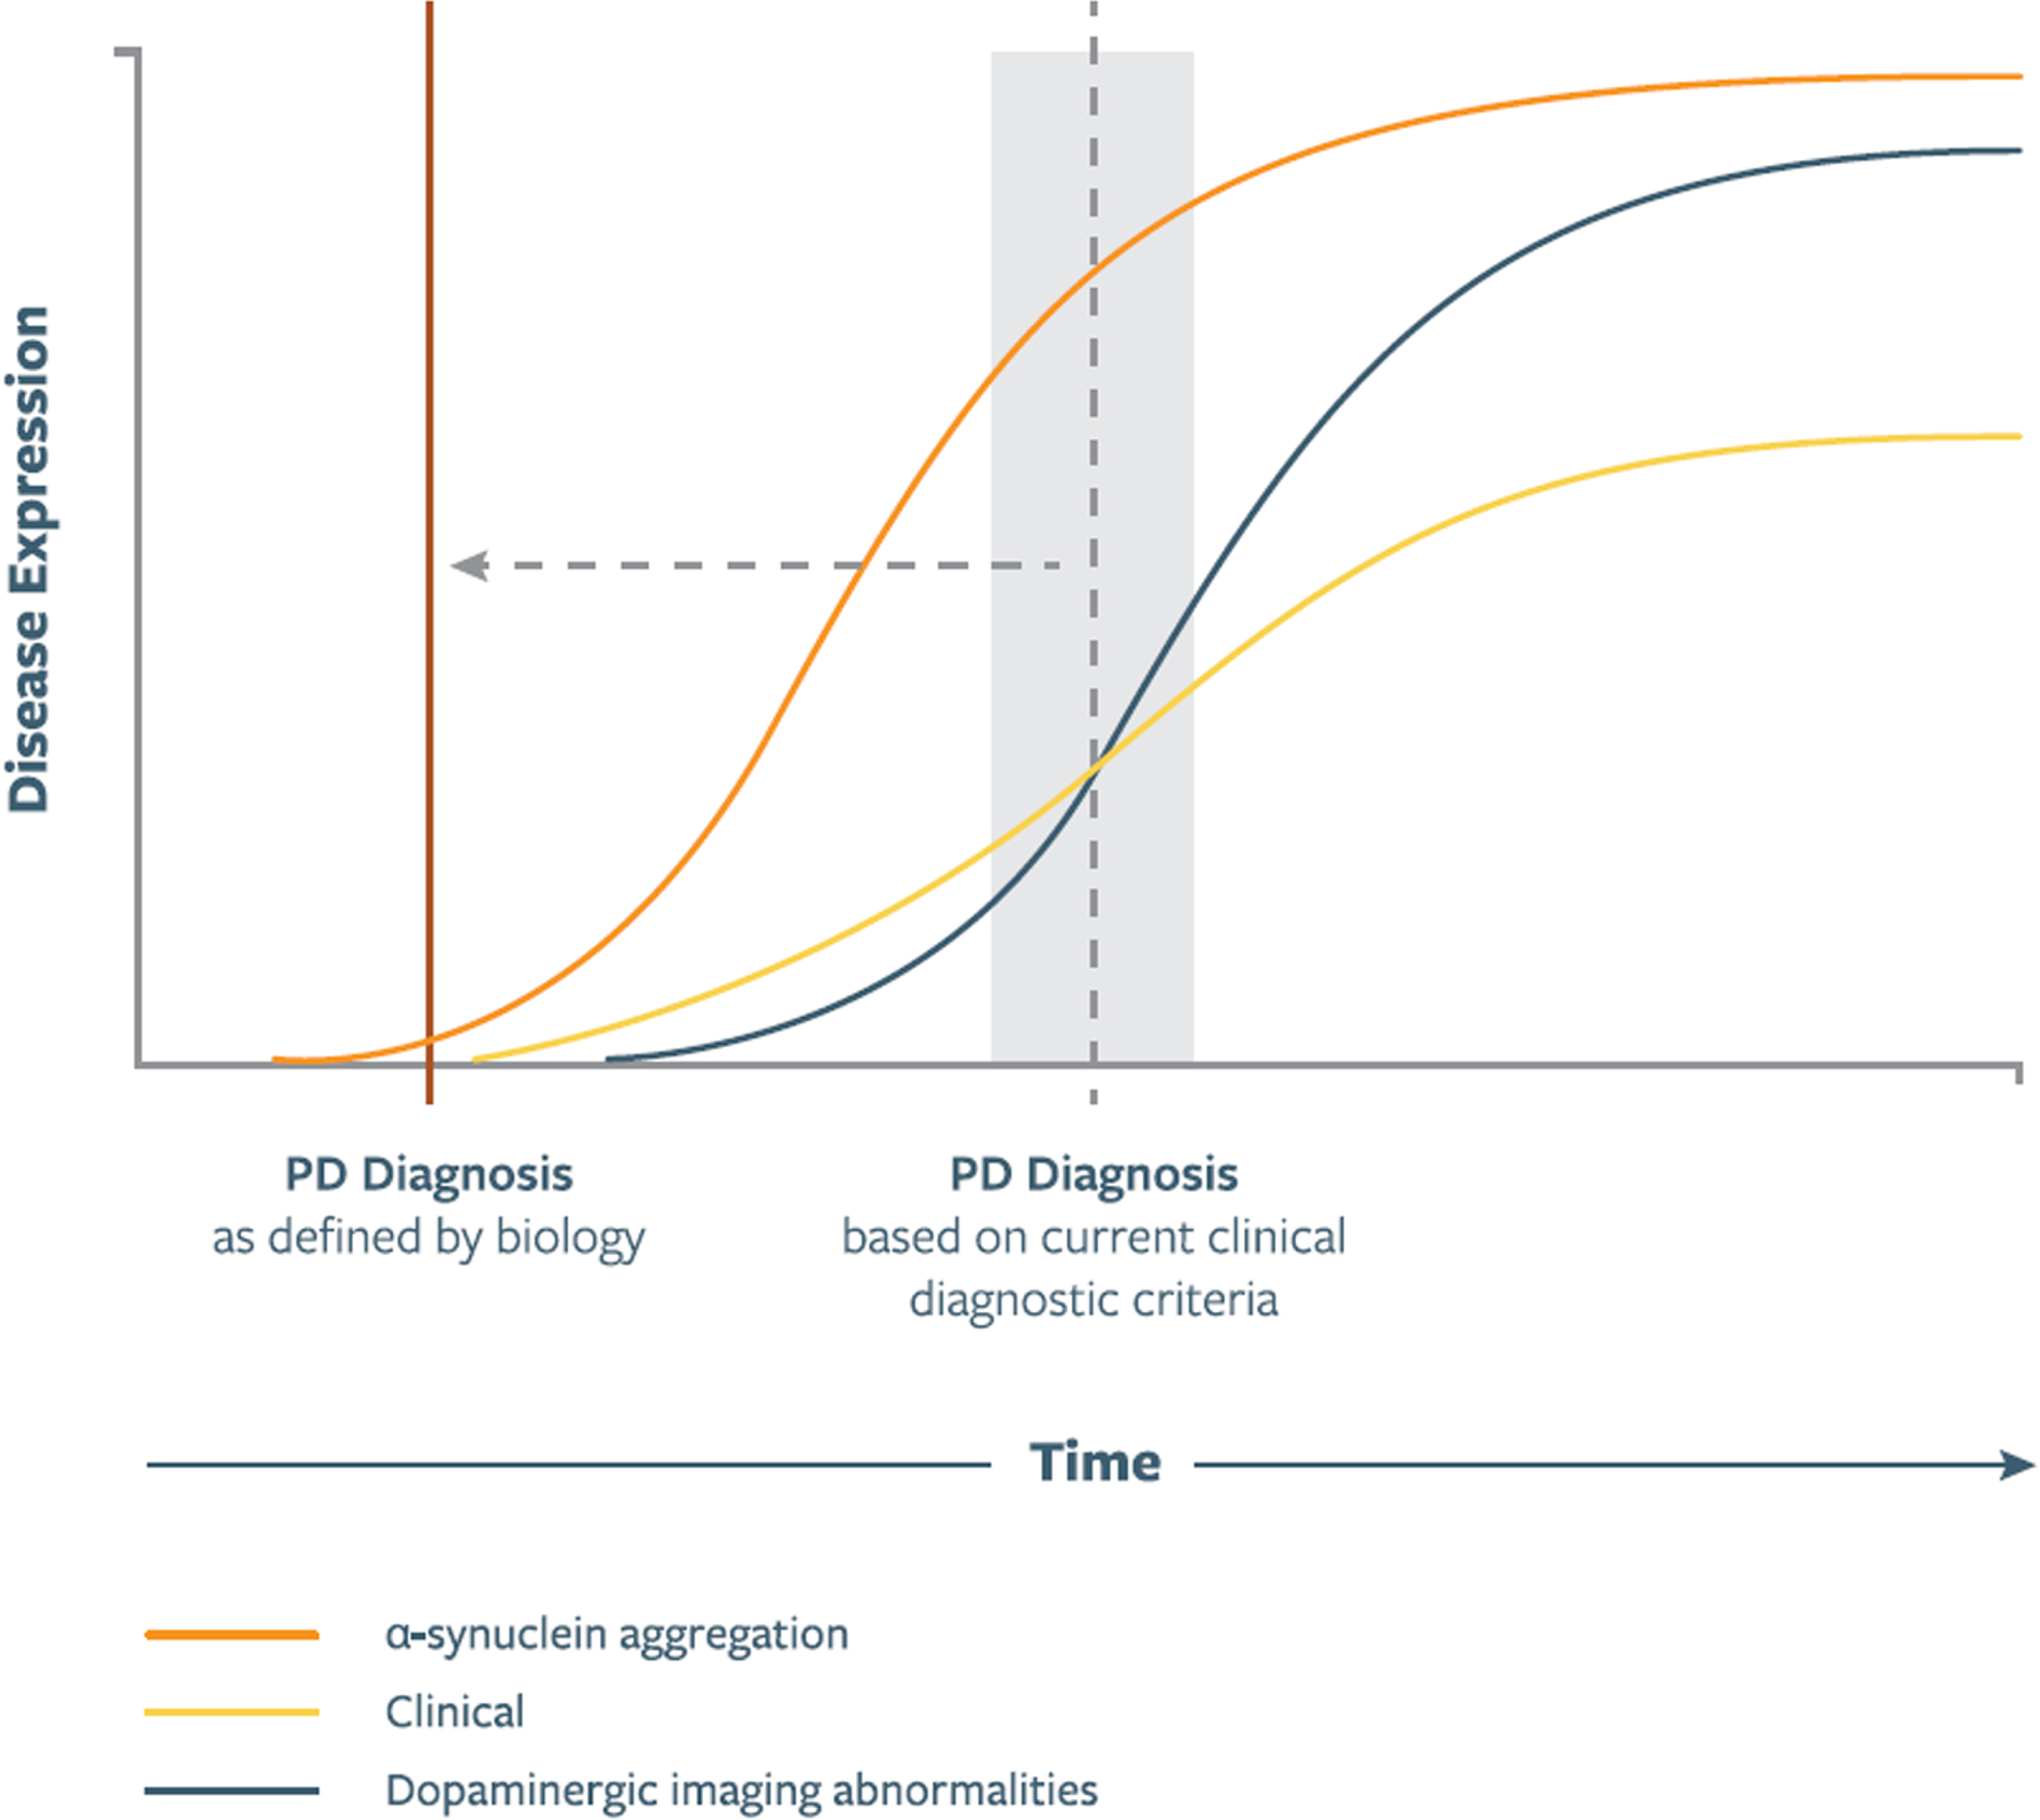 Illustration of putative relationship between asyn aggregation, dopaminergic dysfunction, and clinical manifestations as represented in a biologic staging system for PD. Curve shapes, slopes, and their temporal relationship are qualitative and hypothetical. Time of PD Diagnosis signifies diagnosis based on current clinical diagnostic criteria, which in the proposed staging system will be redefined to the time of onset of the biological changes. In future versions of the staging system these curves will be shaped by data emerging from longitudinal studies.